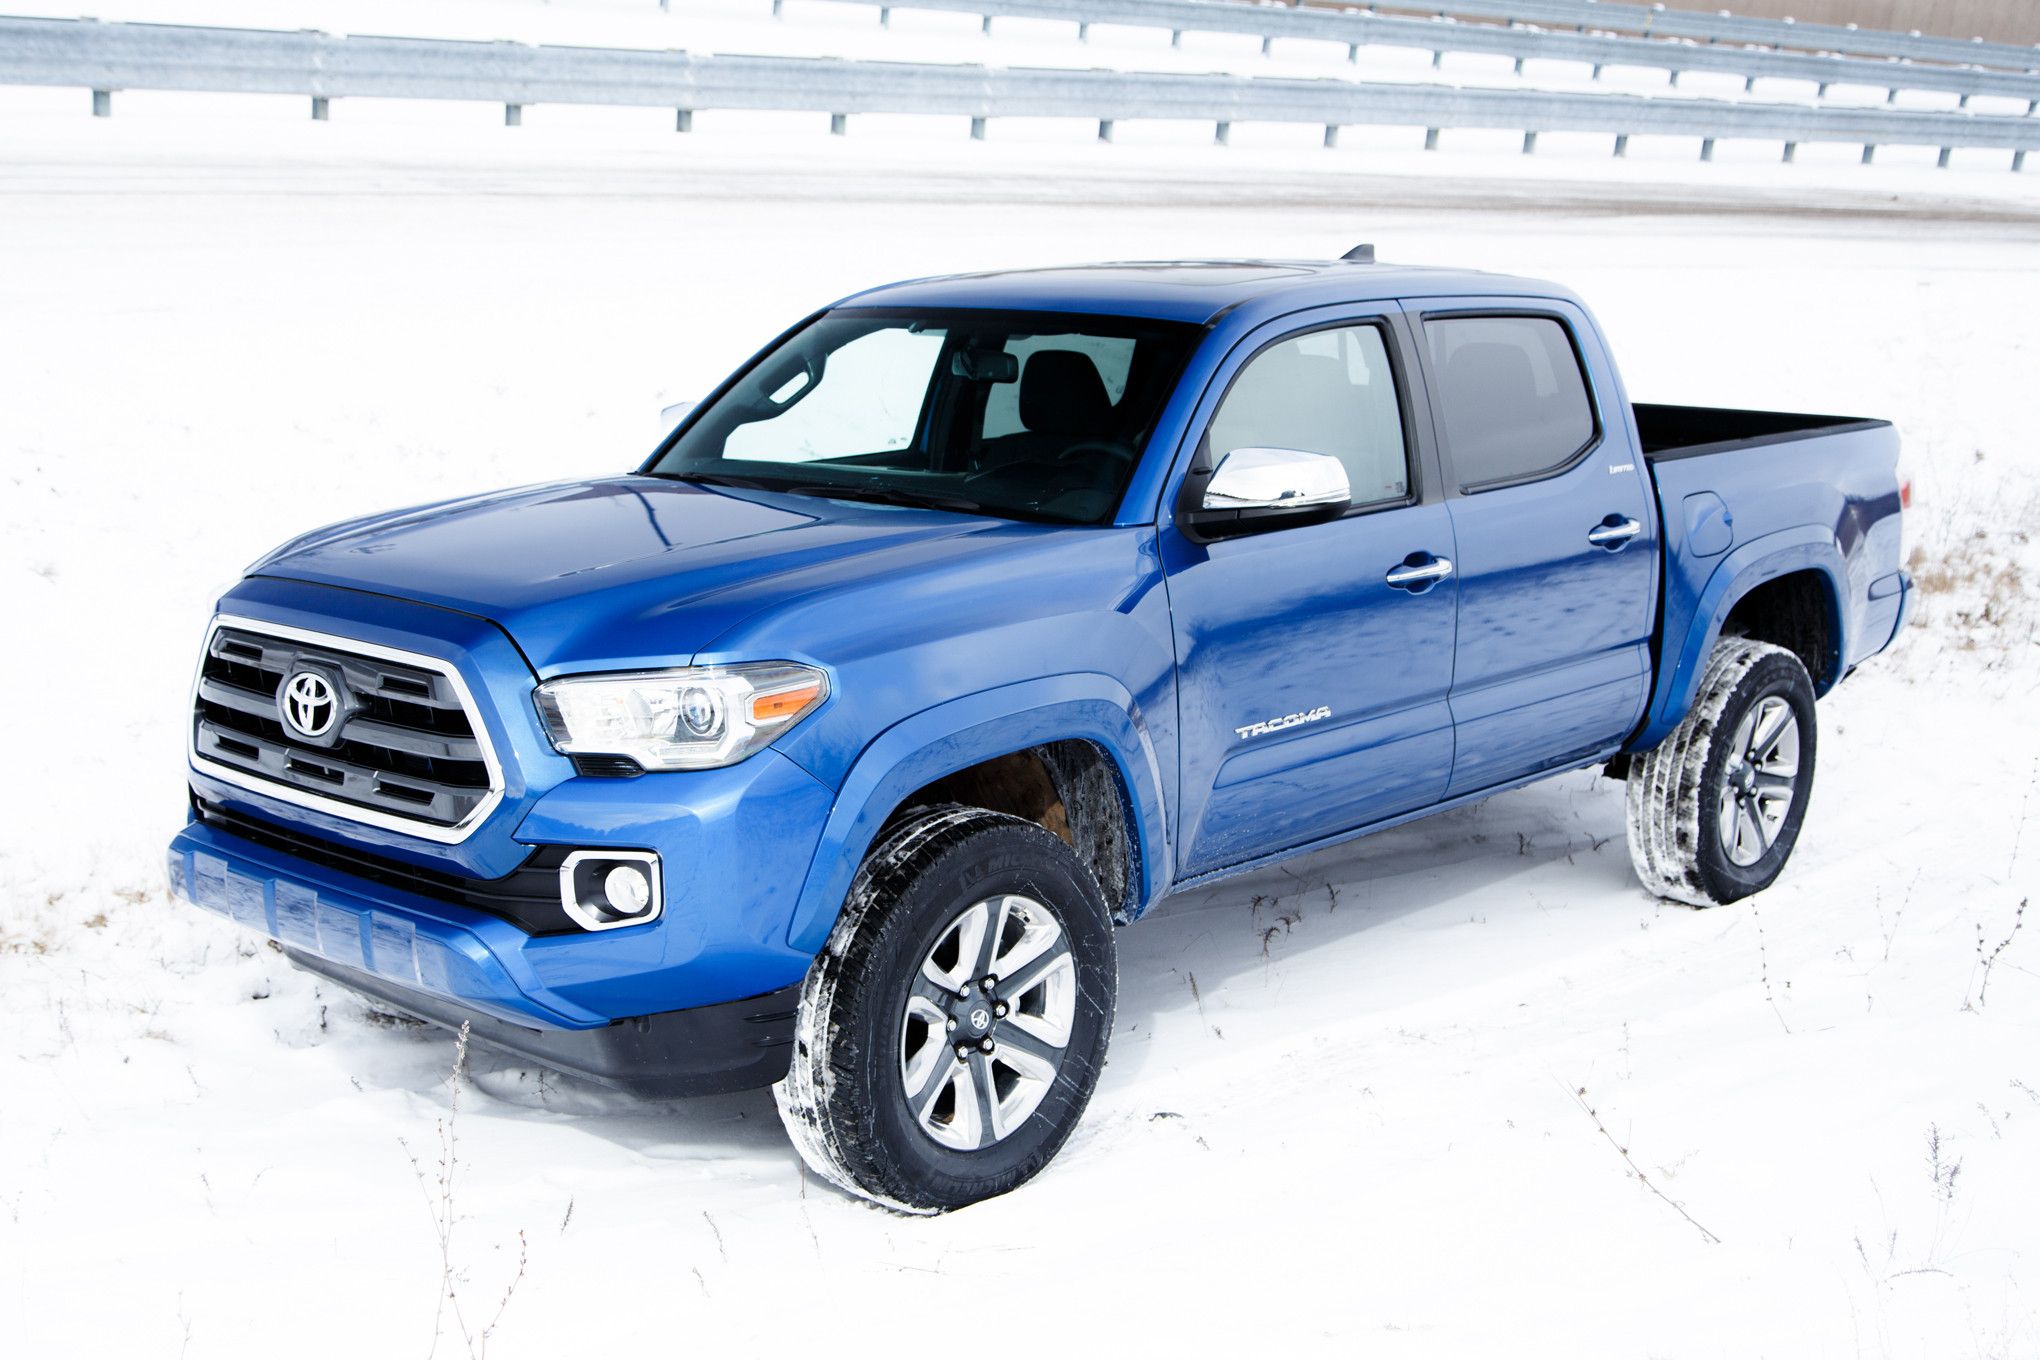 2016 Toyota Tacoma Wallpaper For PC #635 – 2016 Car Wallpapers